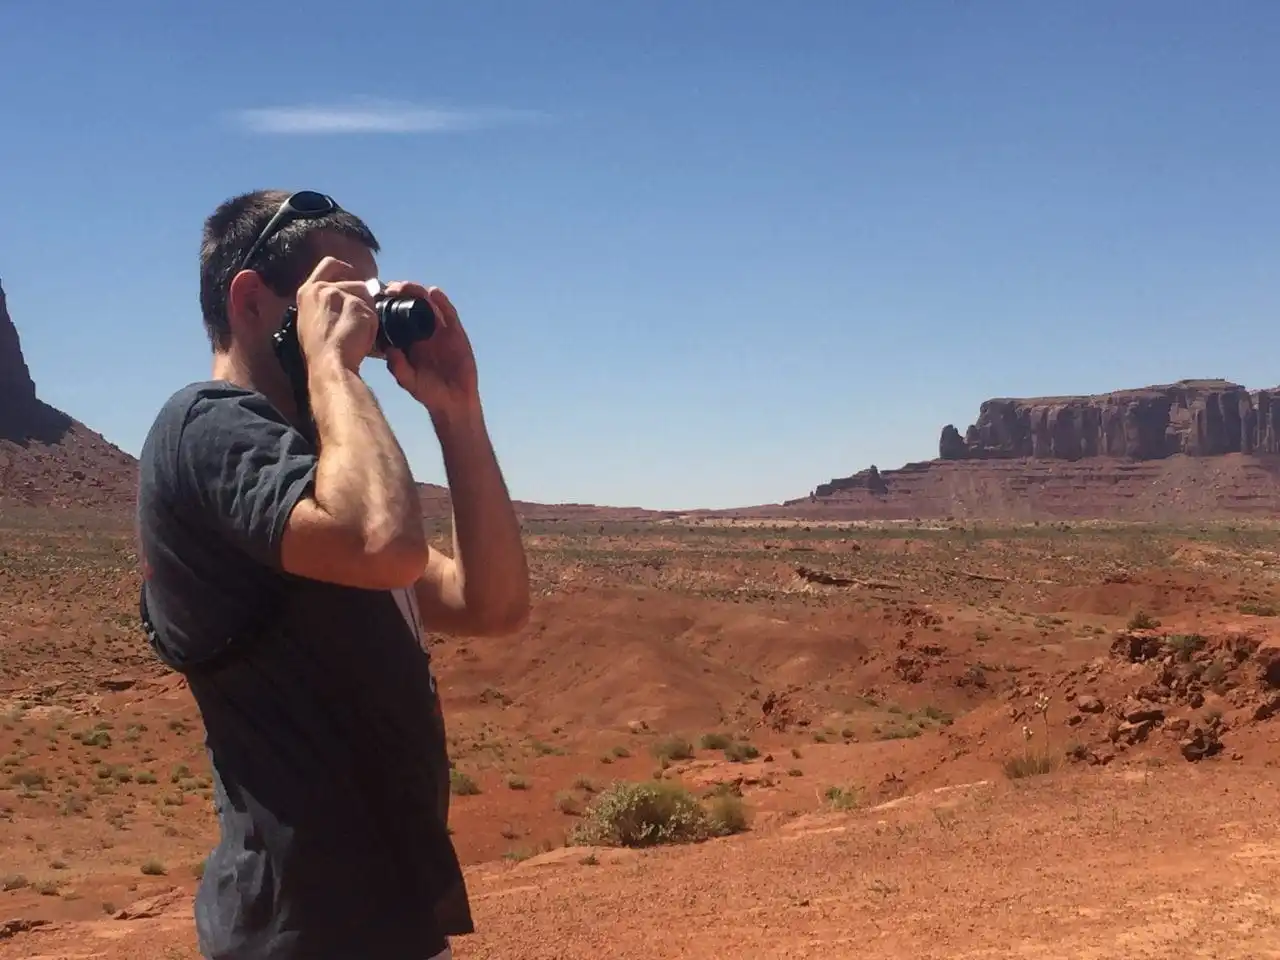 Keith is taking a photo at Monument Valley